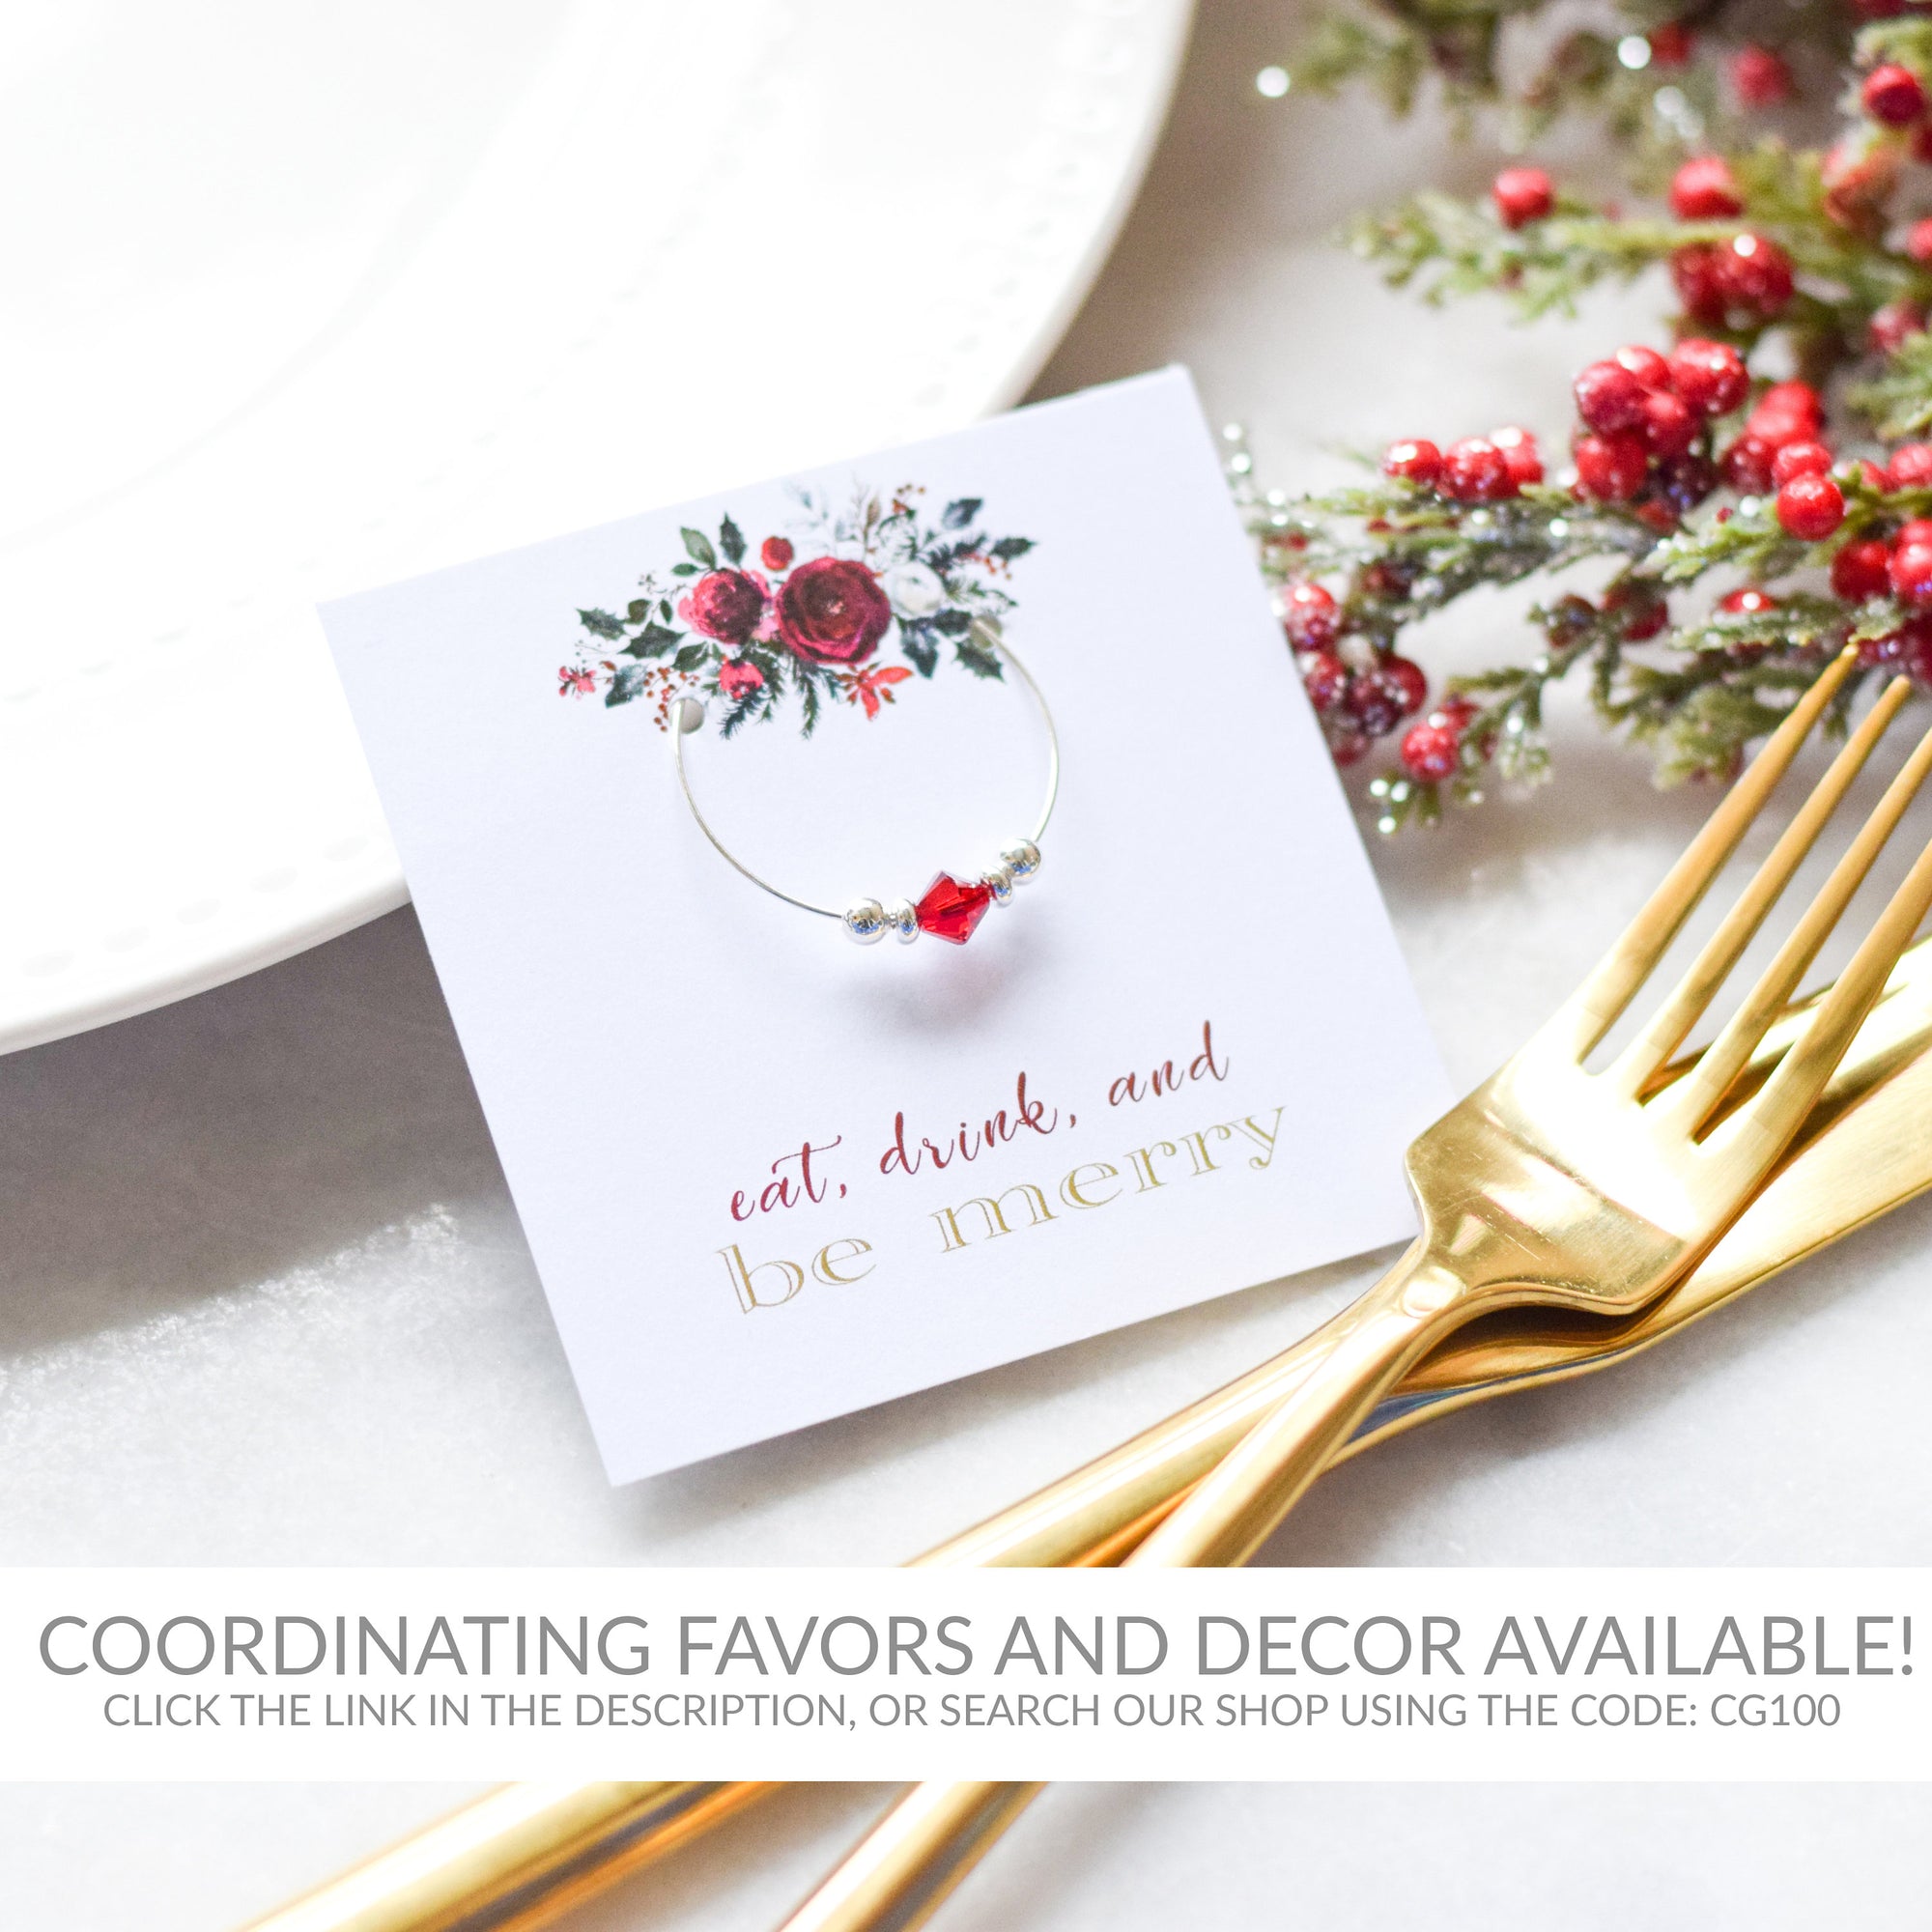 Christmas Wedding Cards and Gifts Sign Printable, Christmas Bridal Shower Cards and Gifts Printable Decorations, INSTANT DOWNLOAD - CG100 - @PlumPolkaDot 